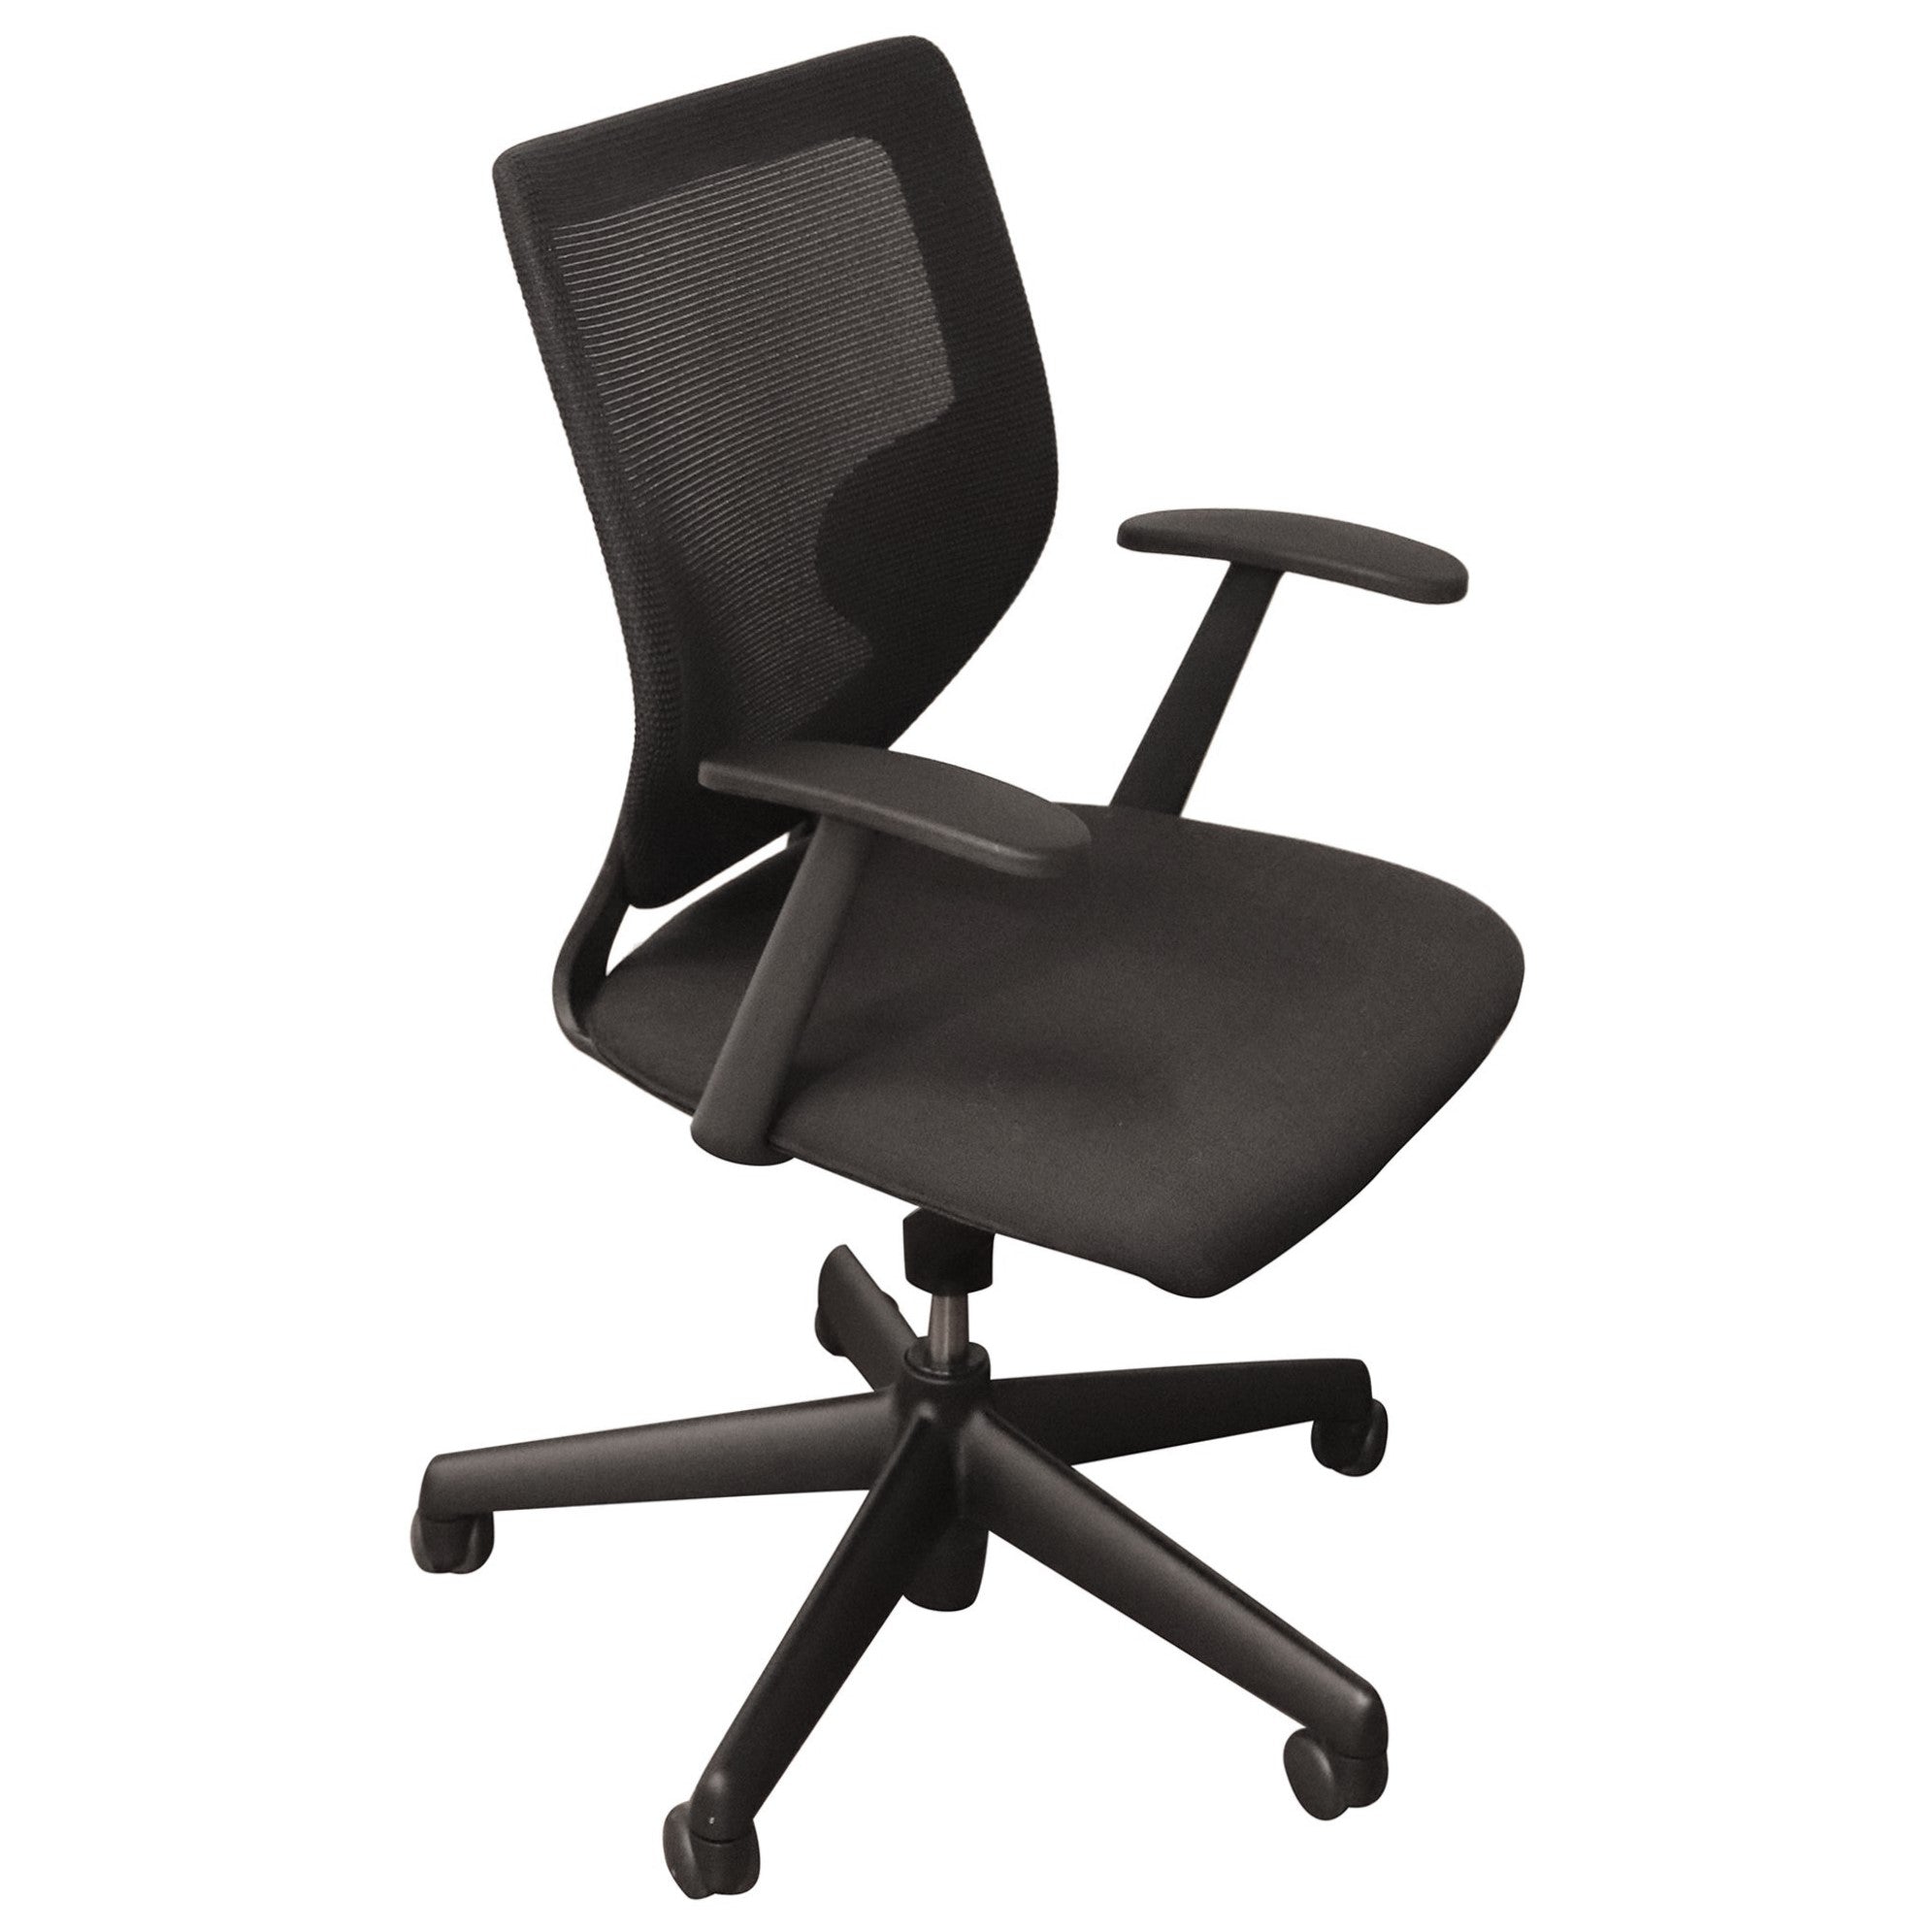 Keilhauer Simple Office Chair, Black - Preowned